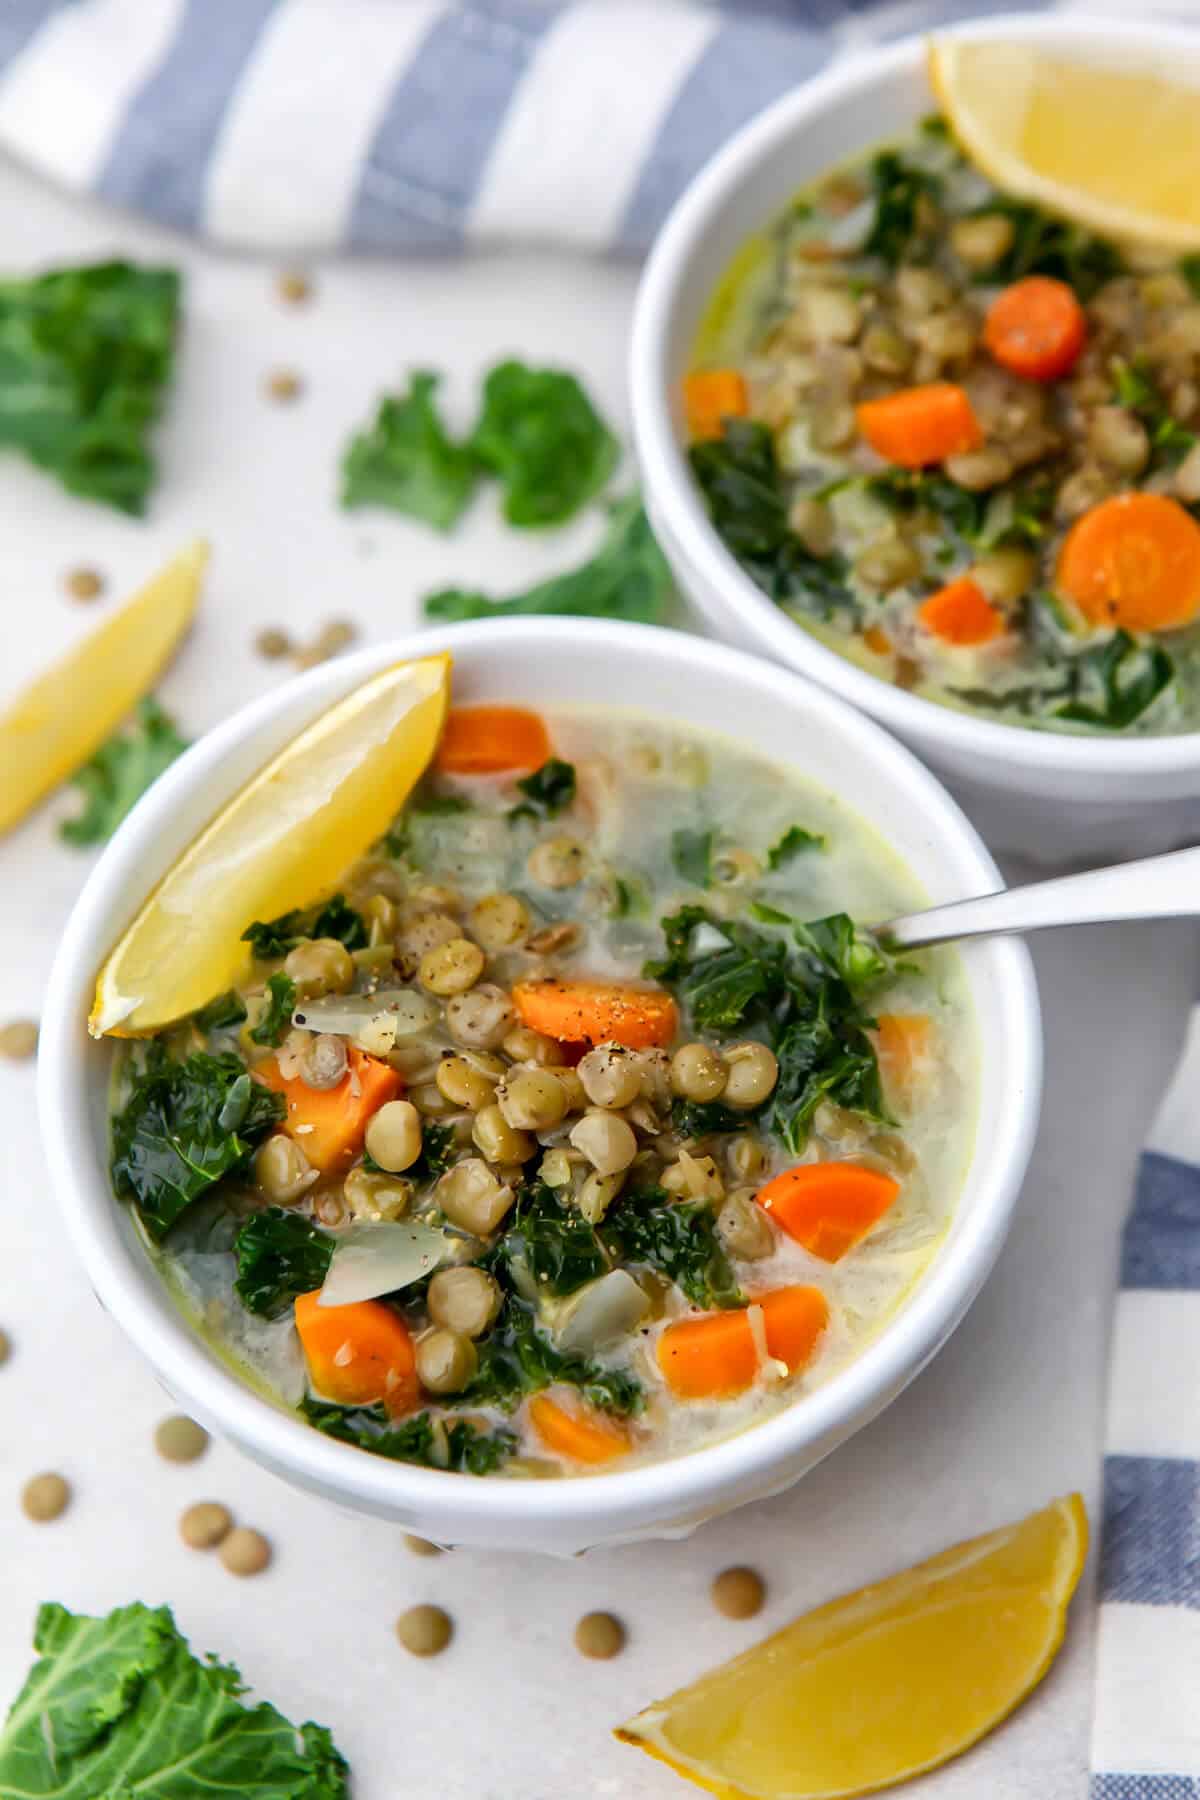 A top view of 2 bowls of lentil soup with carrots, kale, and lemon in a creamy sour cream broth.